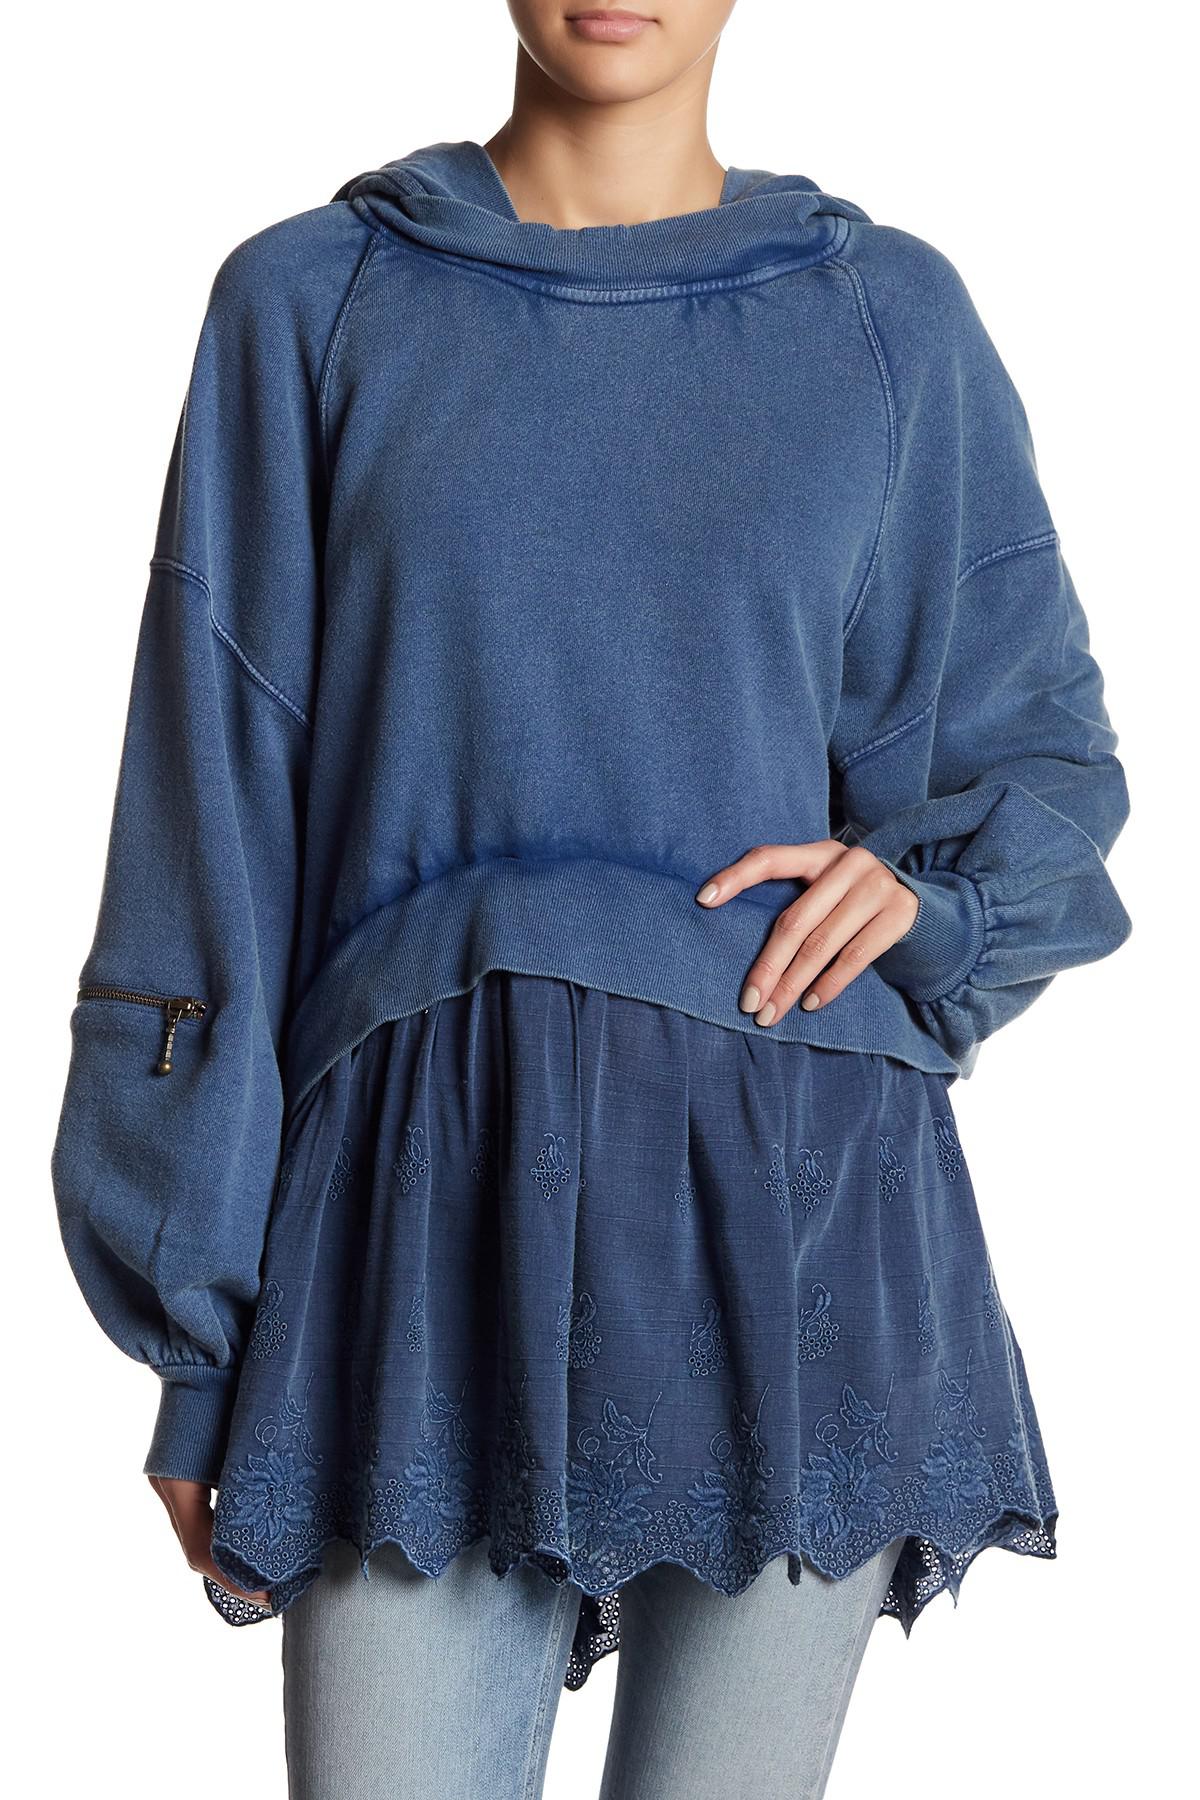 Lyst - Free People Hooded Contrast Pullover in Blue